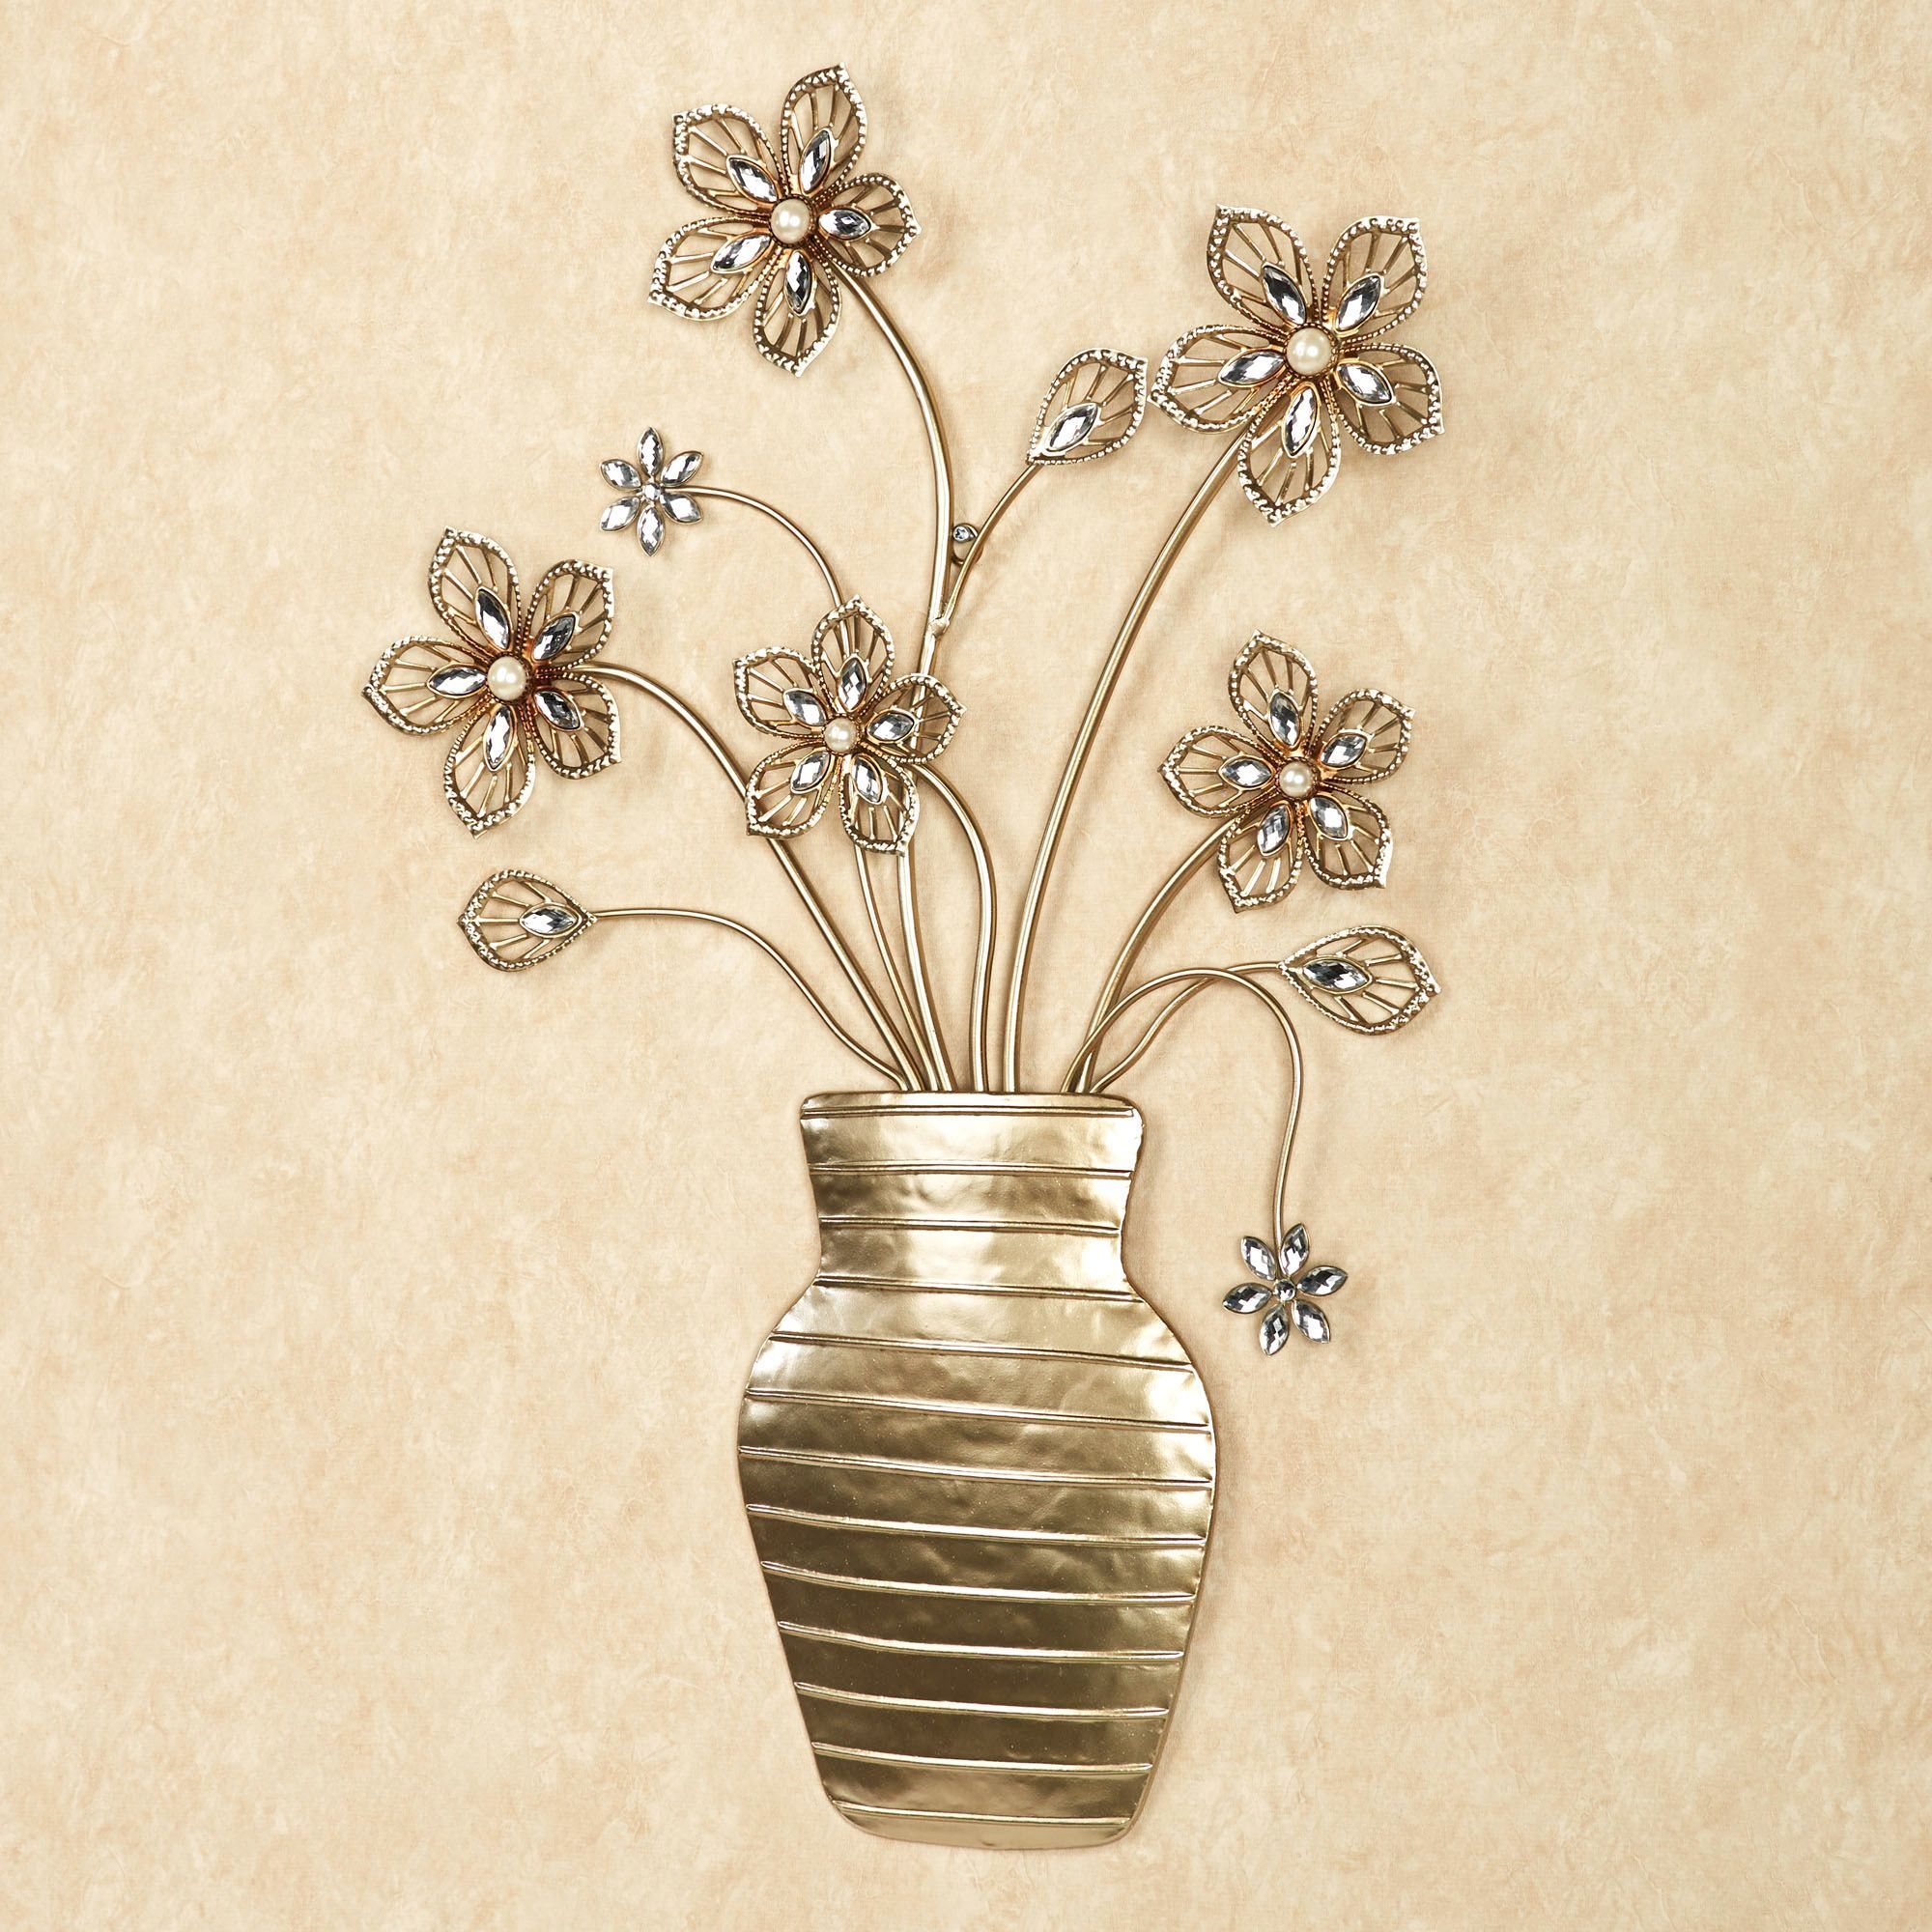 Rosianna Floral Vase Metal Wall Art Pertaining To Current Flowers Wall Art (View 9 of 20)